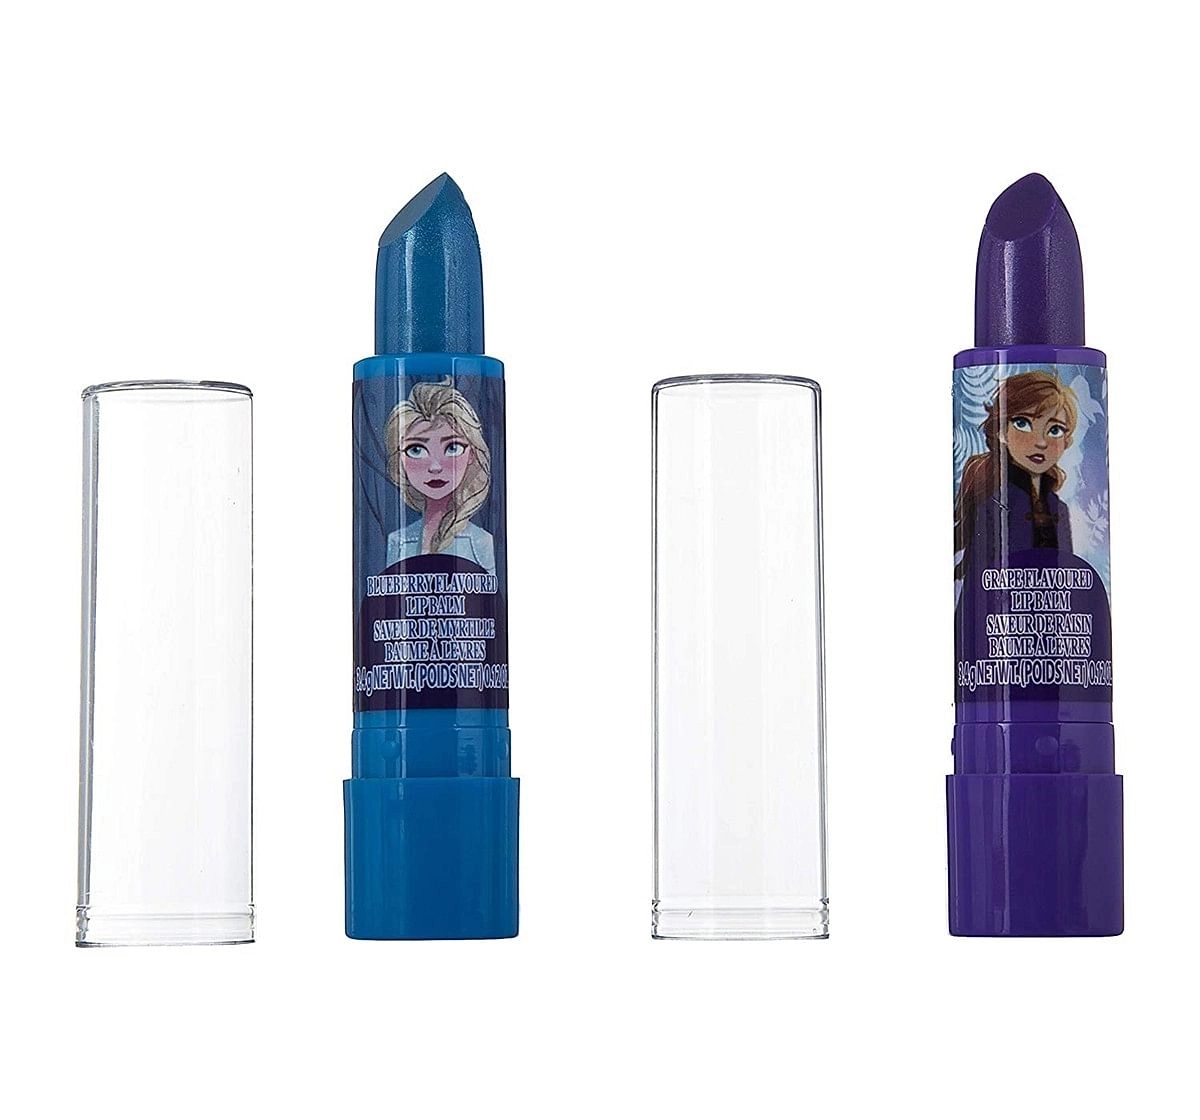 Disney Frozen 2  - 7 Piece Lip Balm Cosmetic Gift Set with Light-Up Mirror Toileteries and Makeup for Kids age 3Y+ 